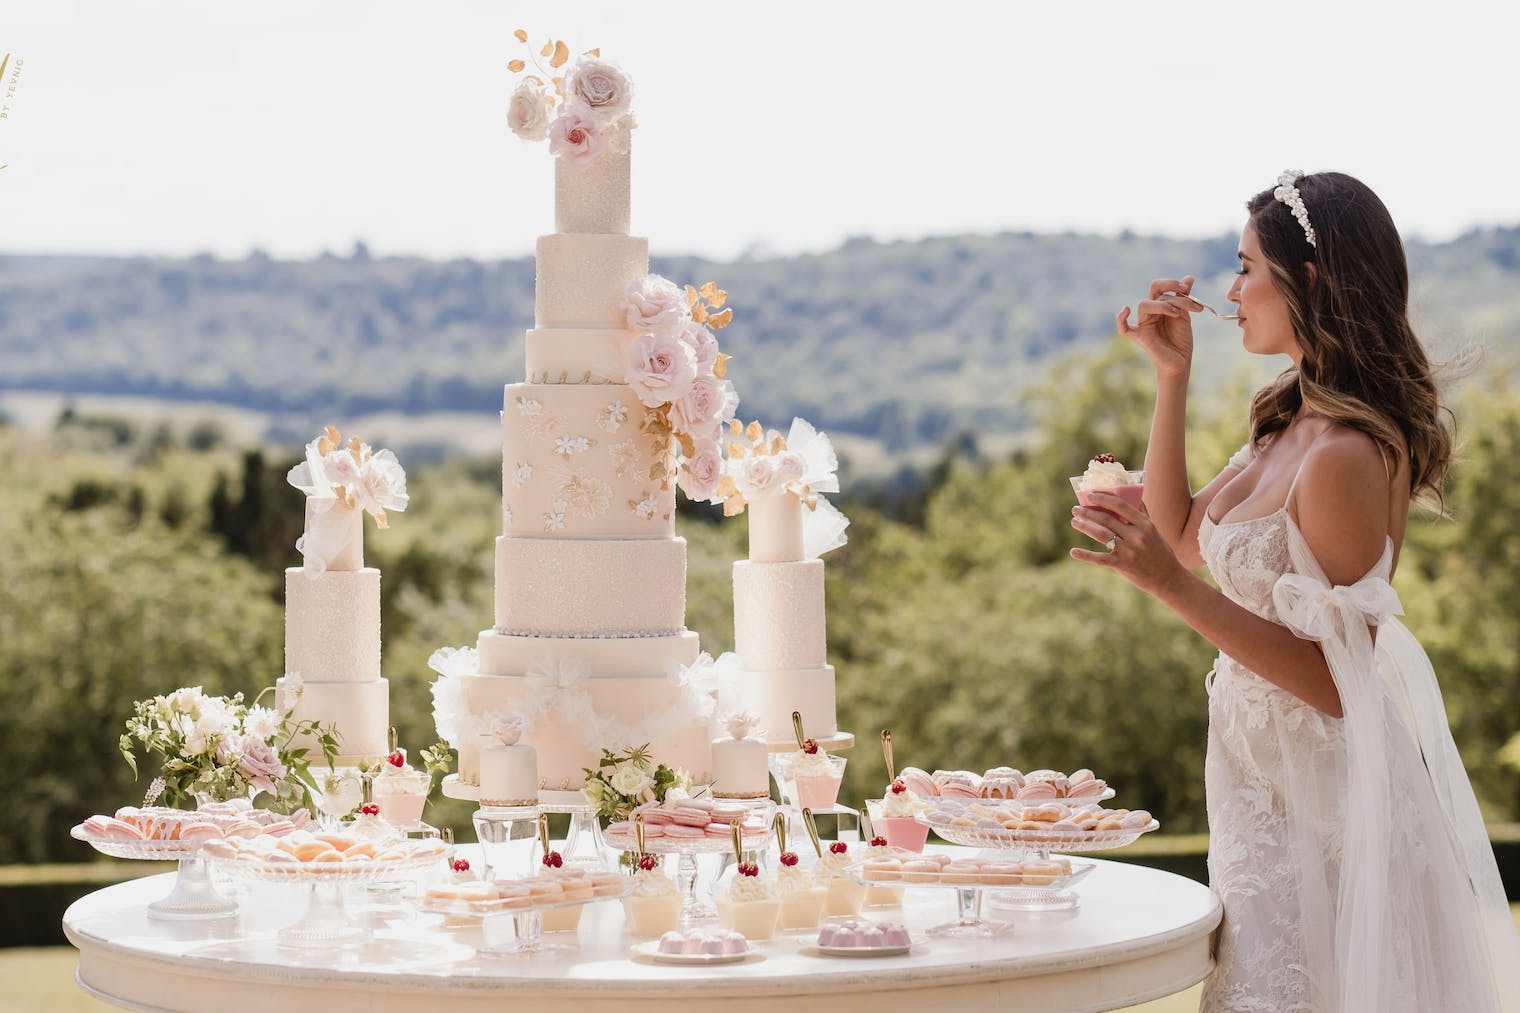 What is the best wedding cake size for 80 guests?